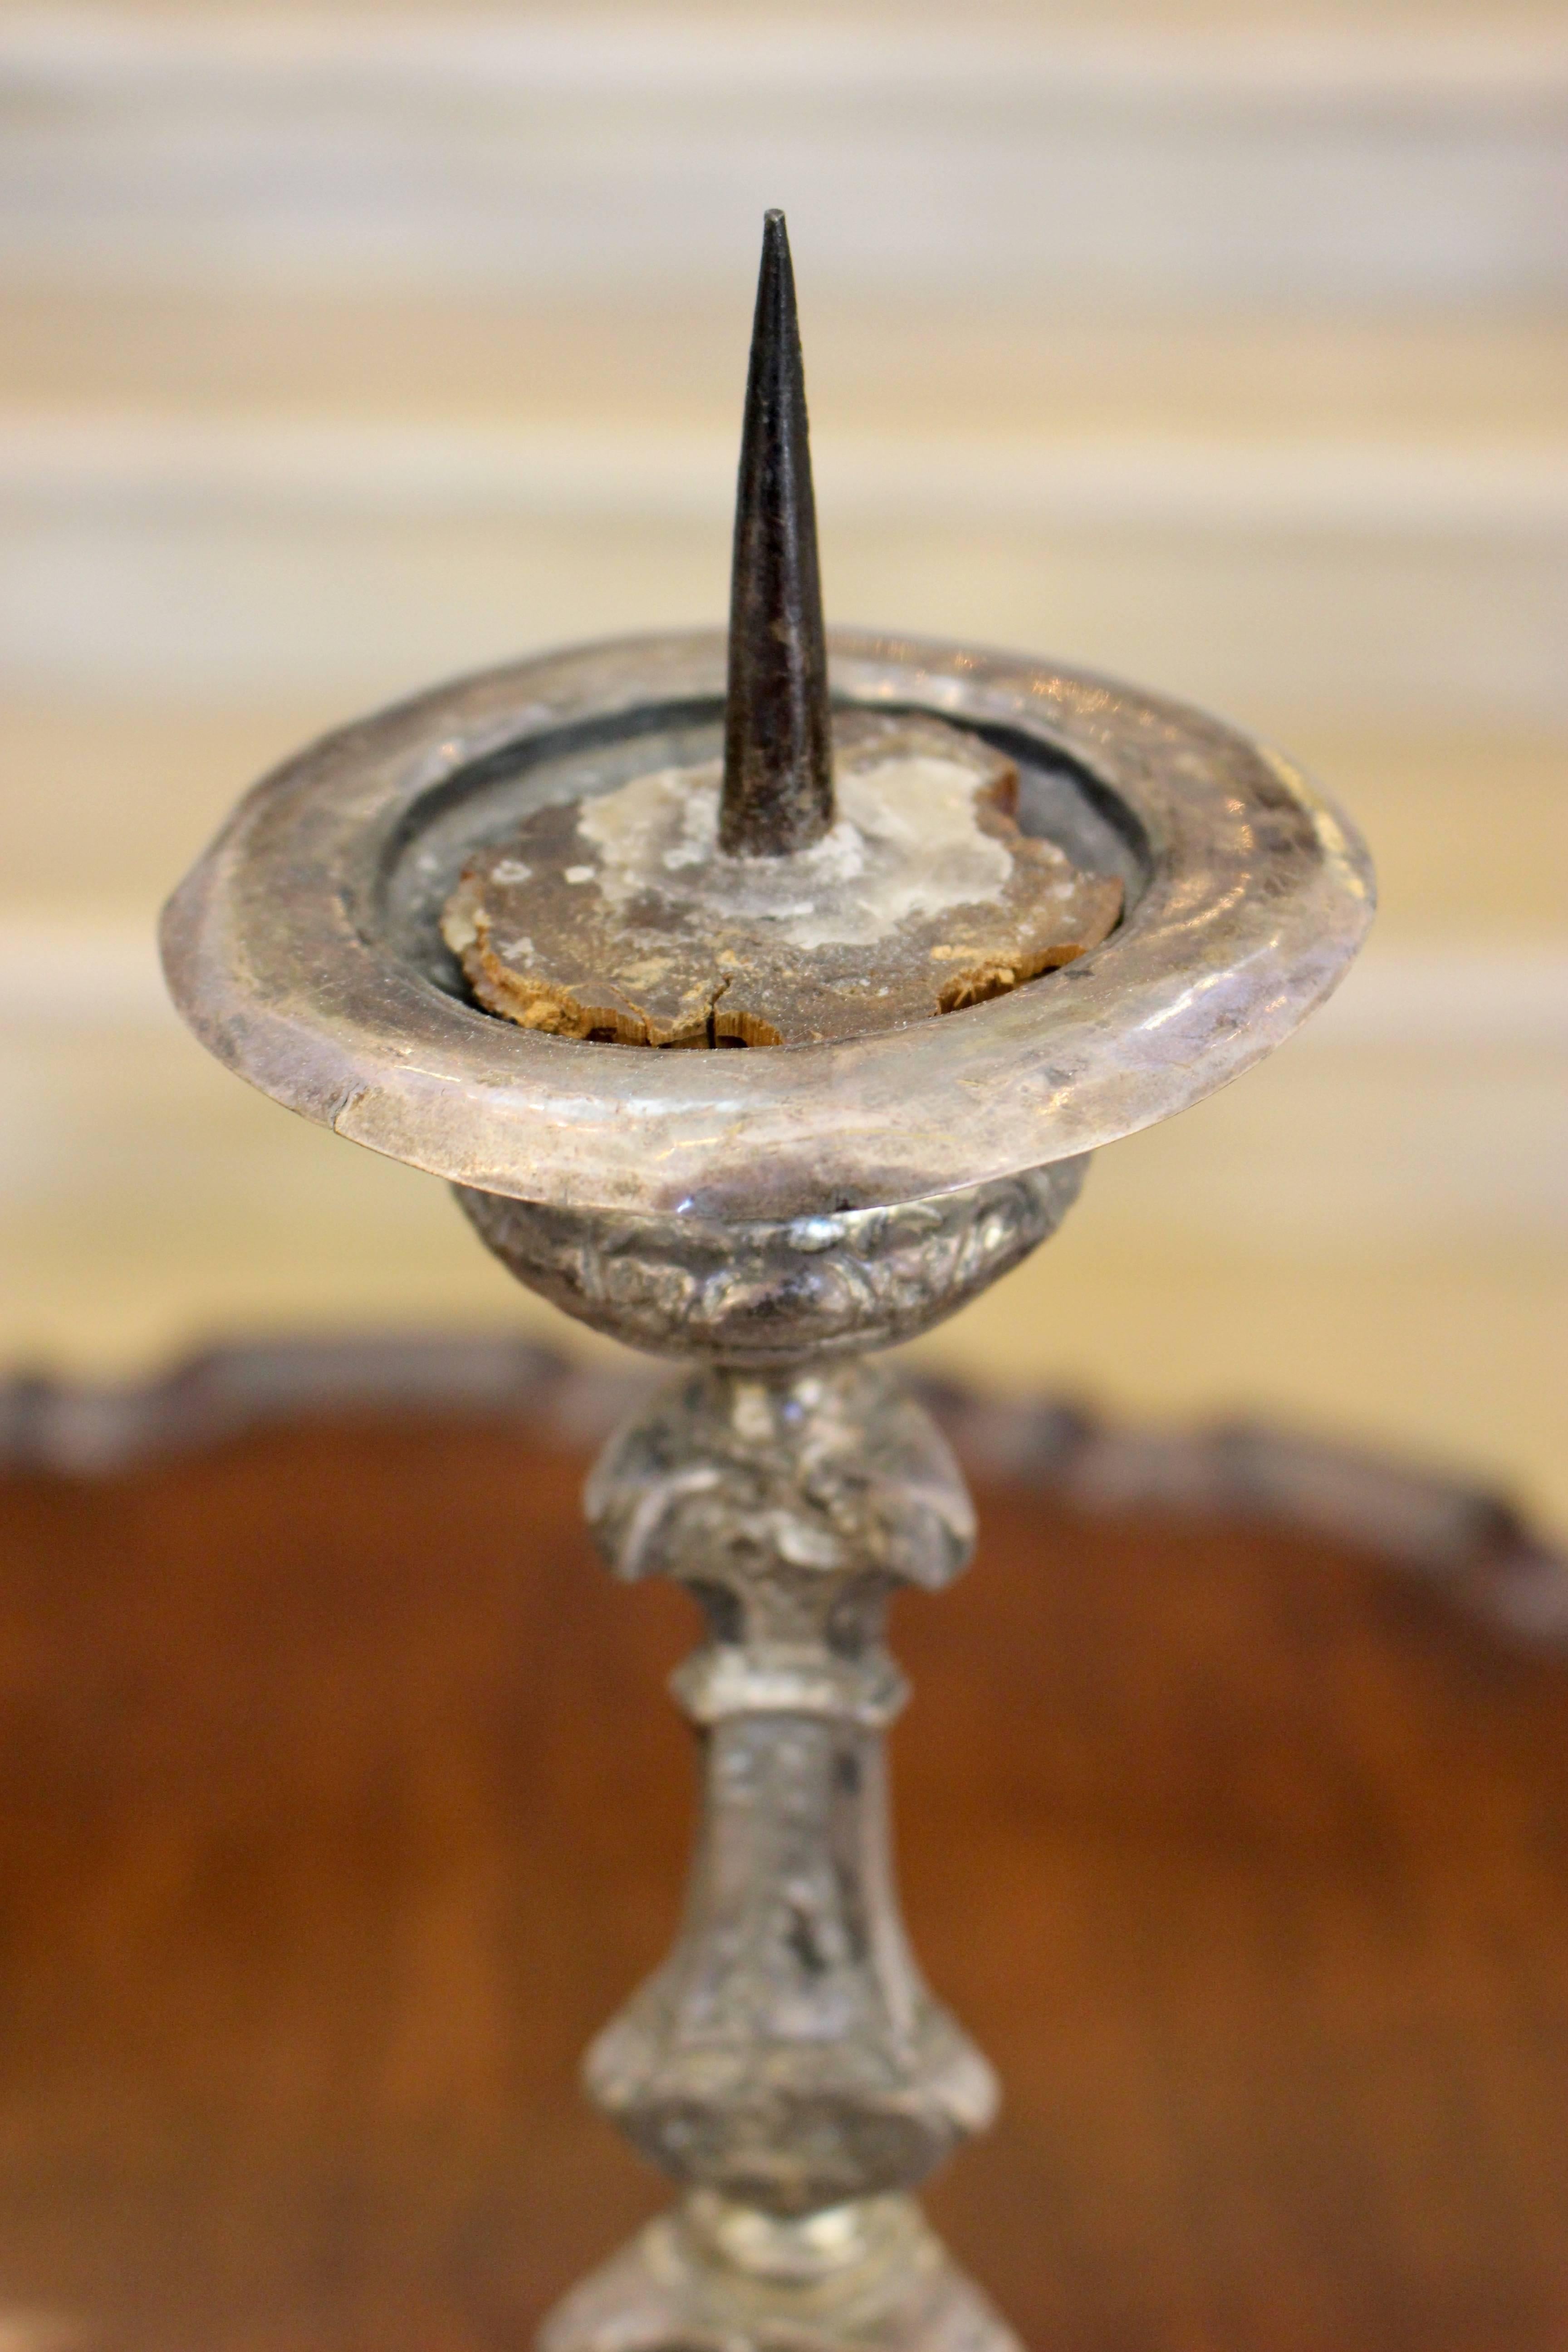 A pair of decorative matching silvered brass pricket candlesticks resting on a triform base with embossed Baroque foliate and scrolls motifs. Each presents a multi-baluster stem supporting an elegant urn-shaped drip pan from which tall prickets